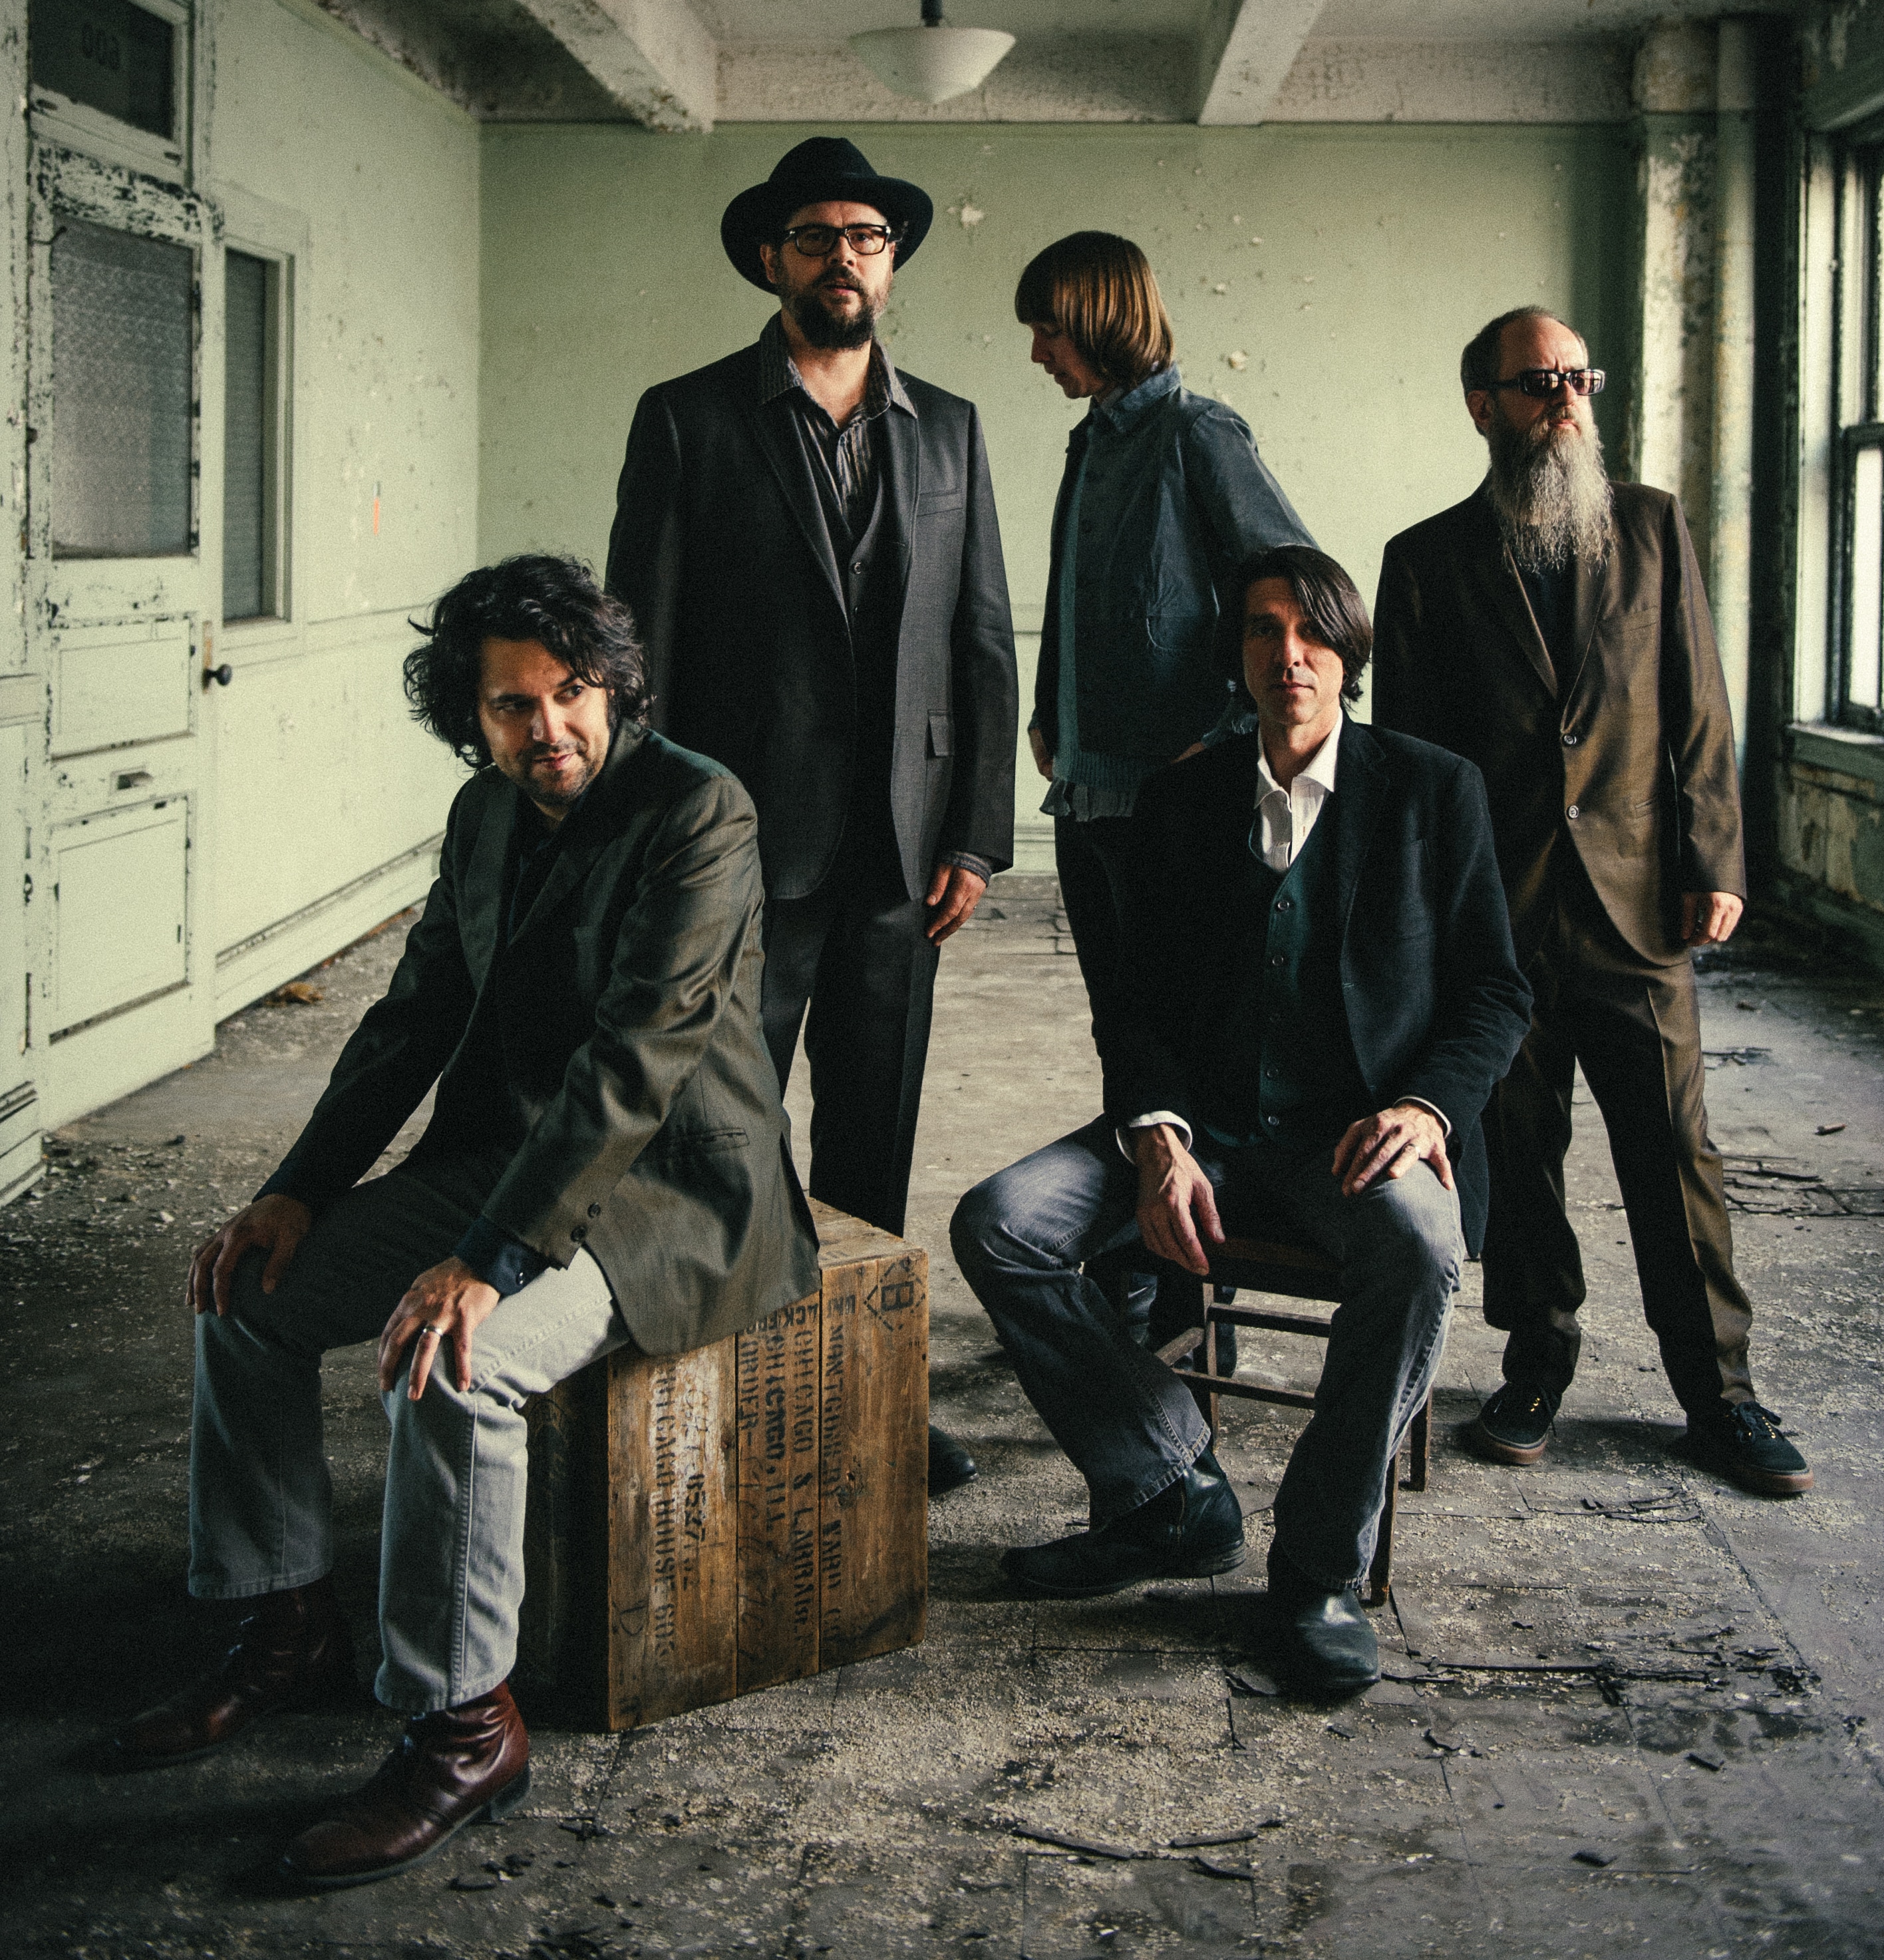 Drive-By Truckers Share Live Version of “Girls Who Smoke”